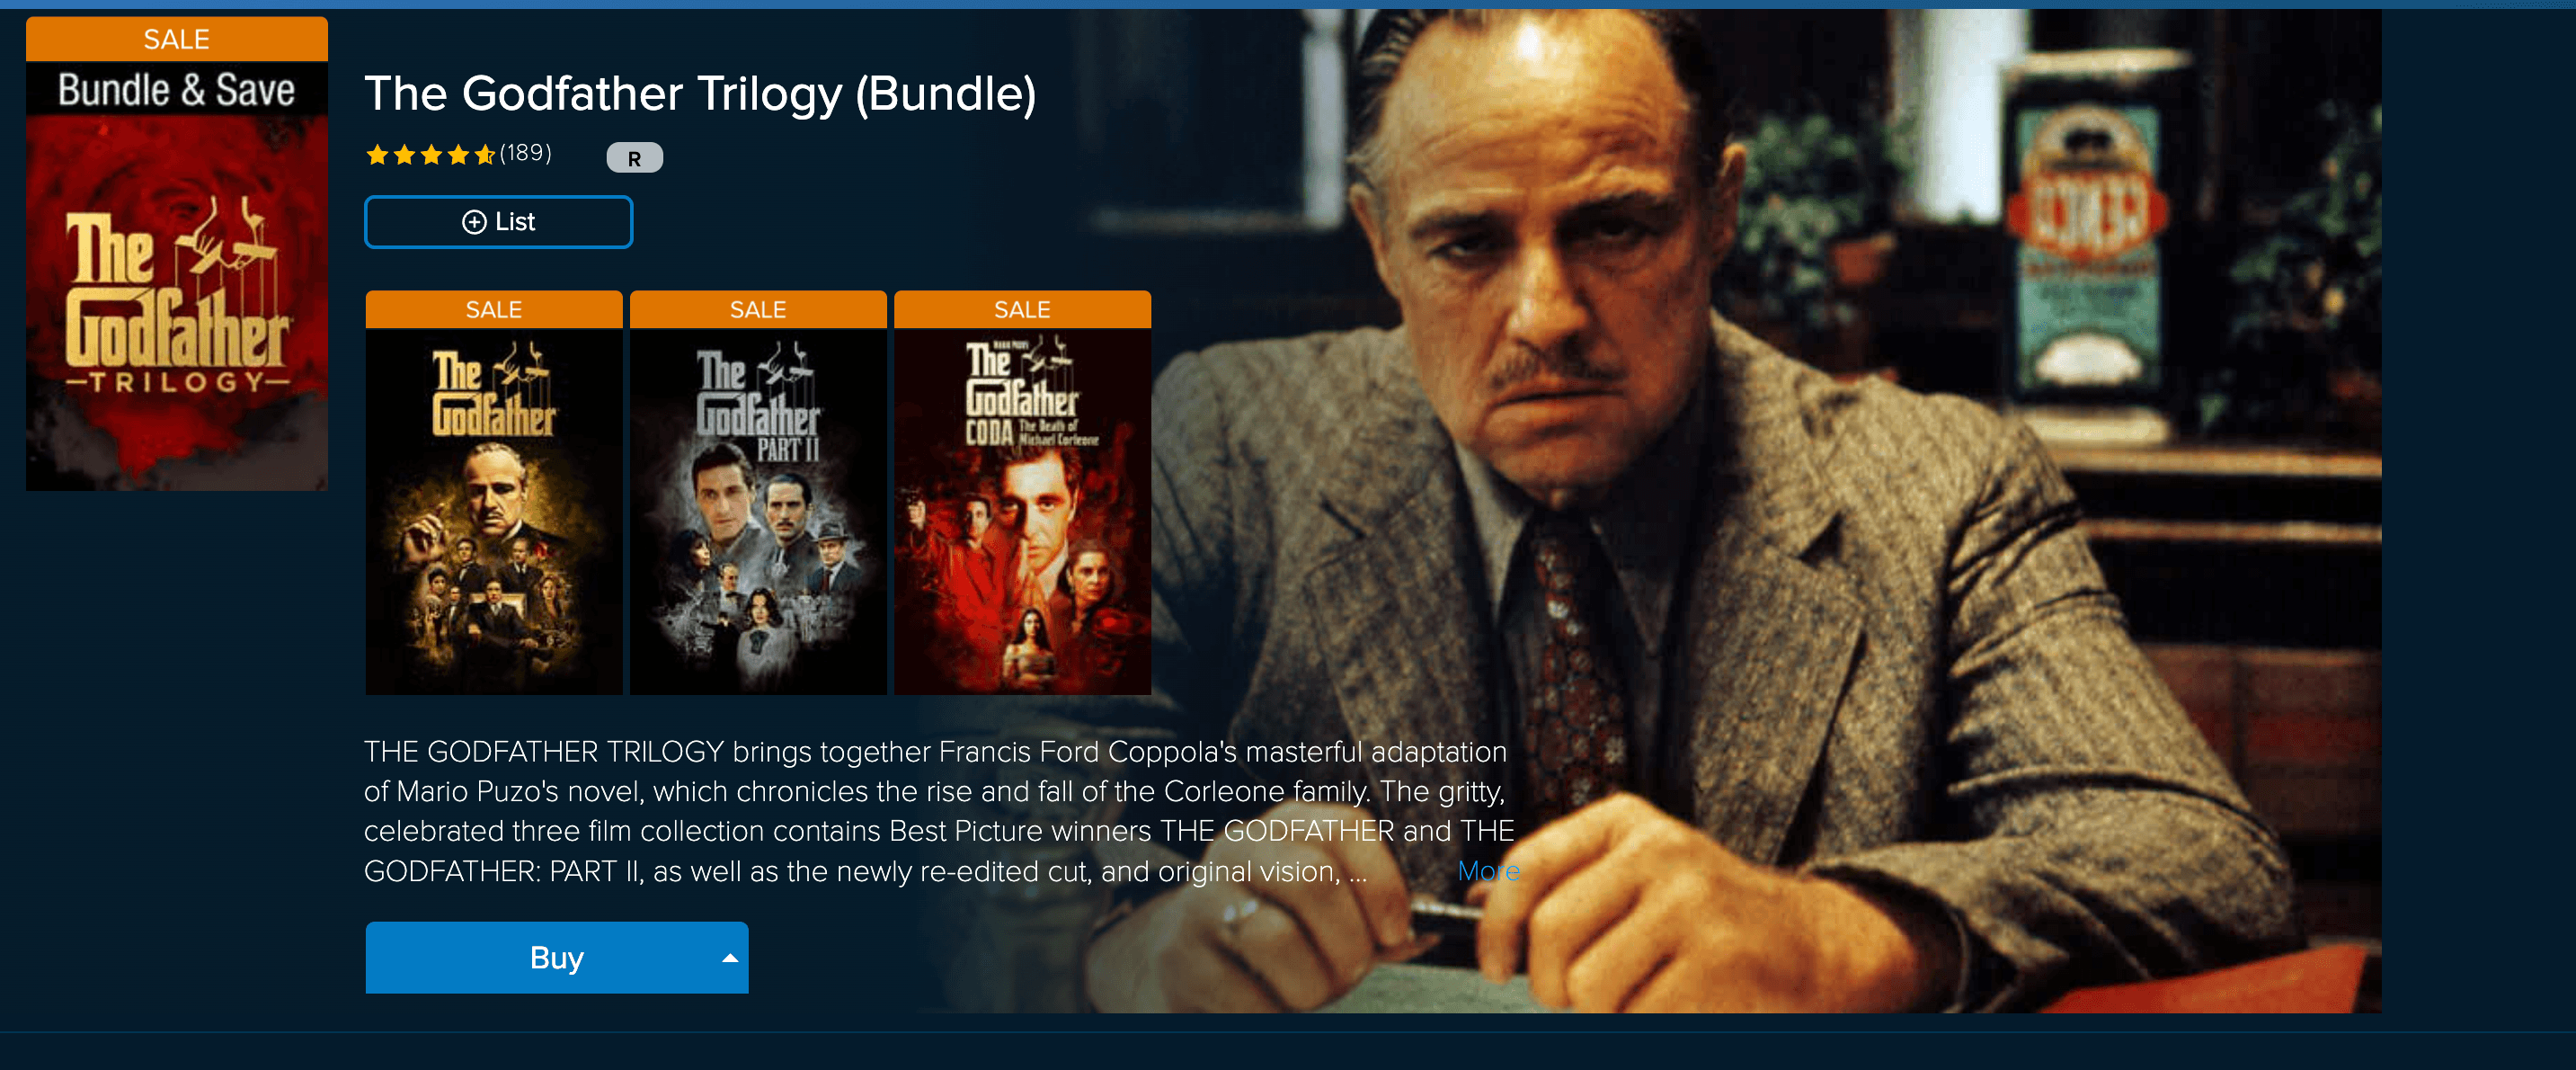 ‘The Godfather’ Trilogy is Now Available on Vudu in 4K UHD for the First Time